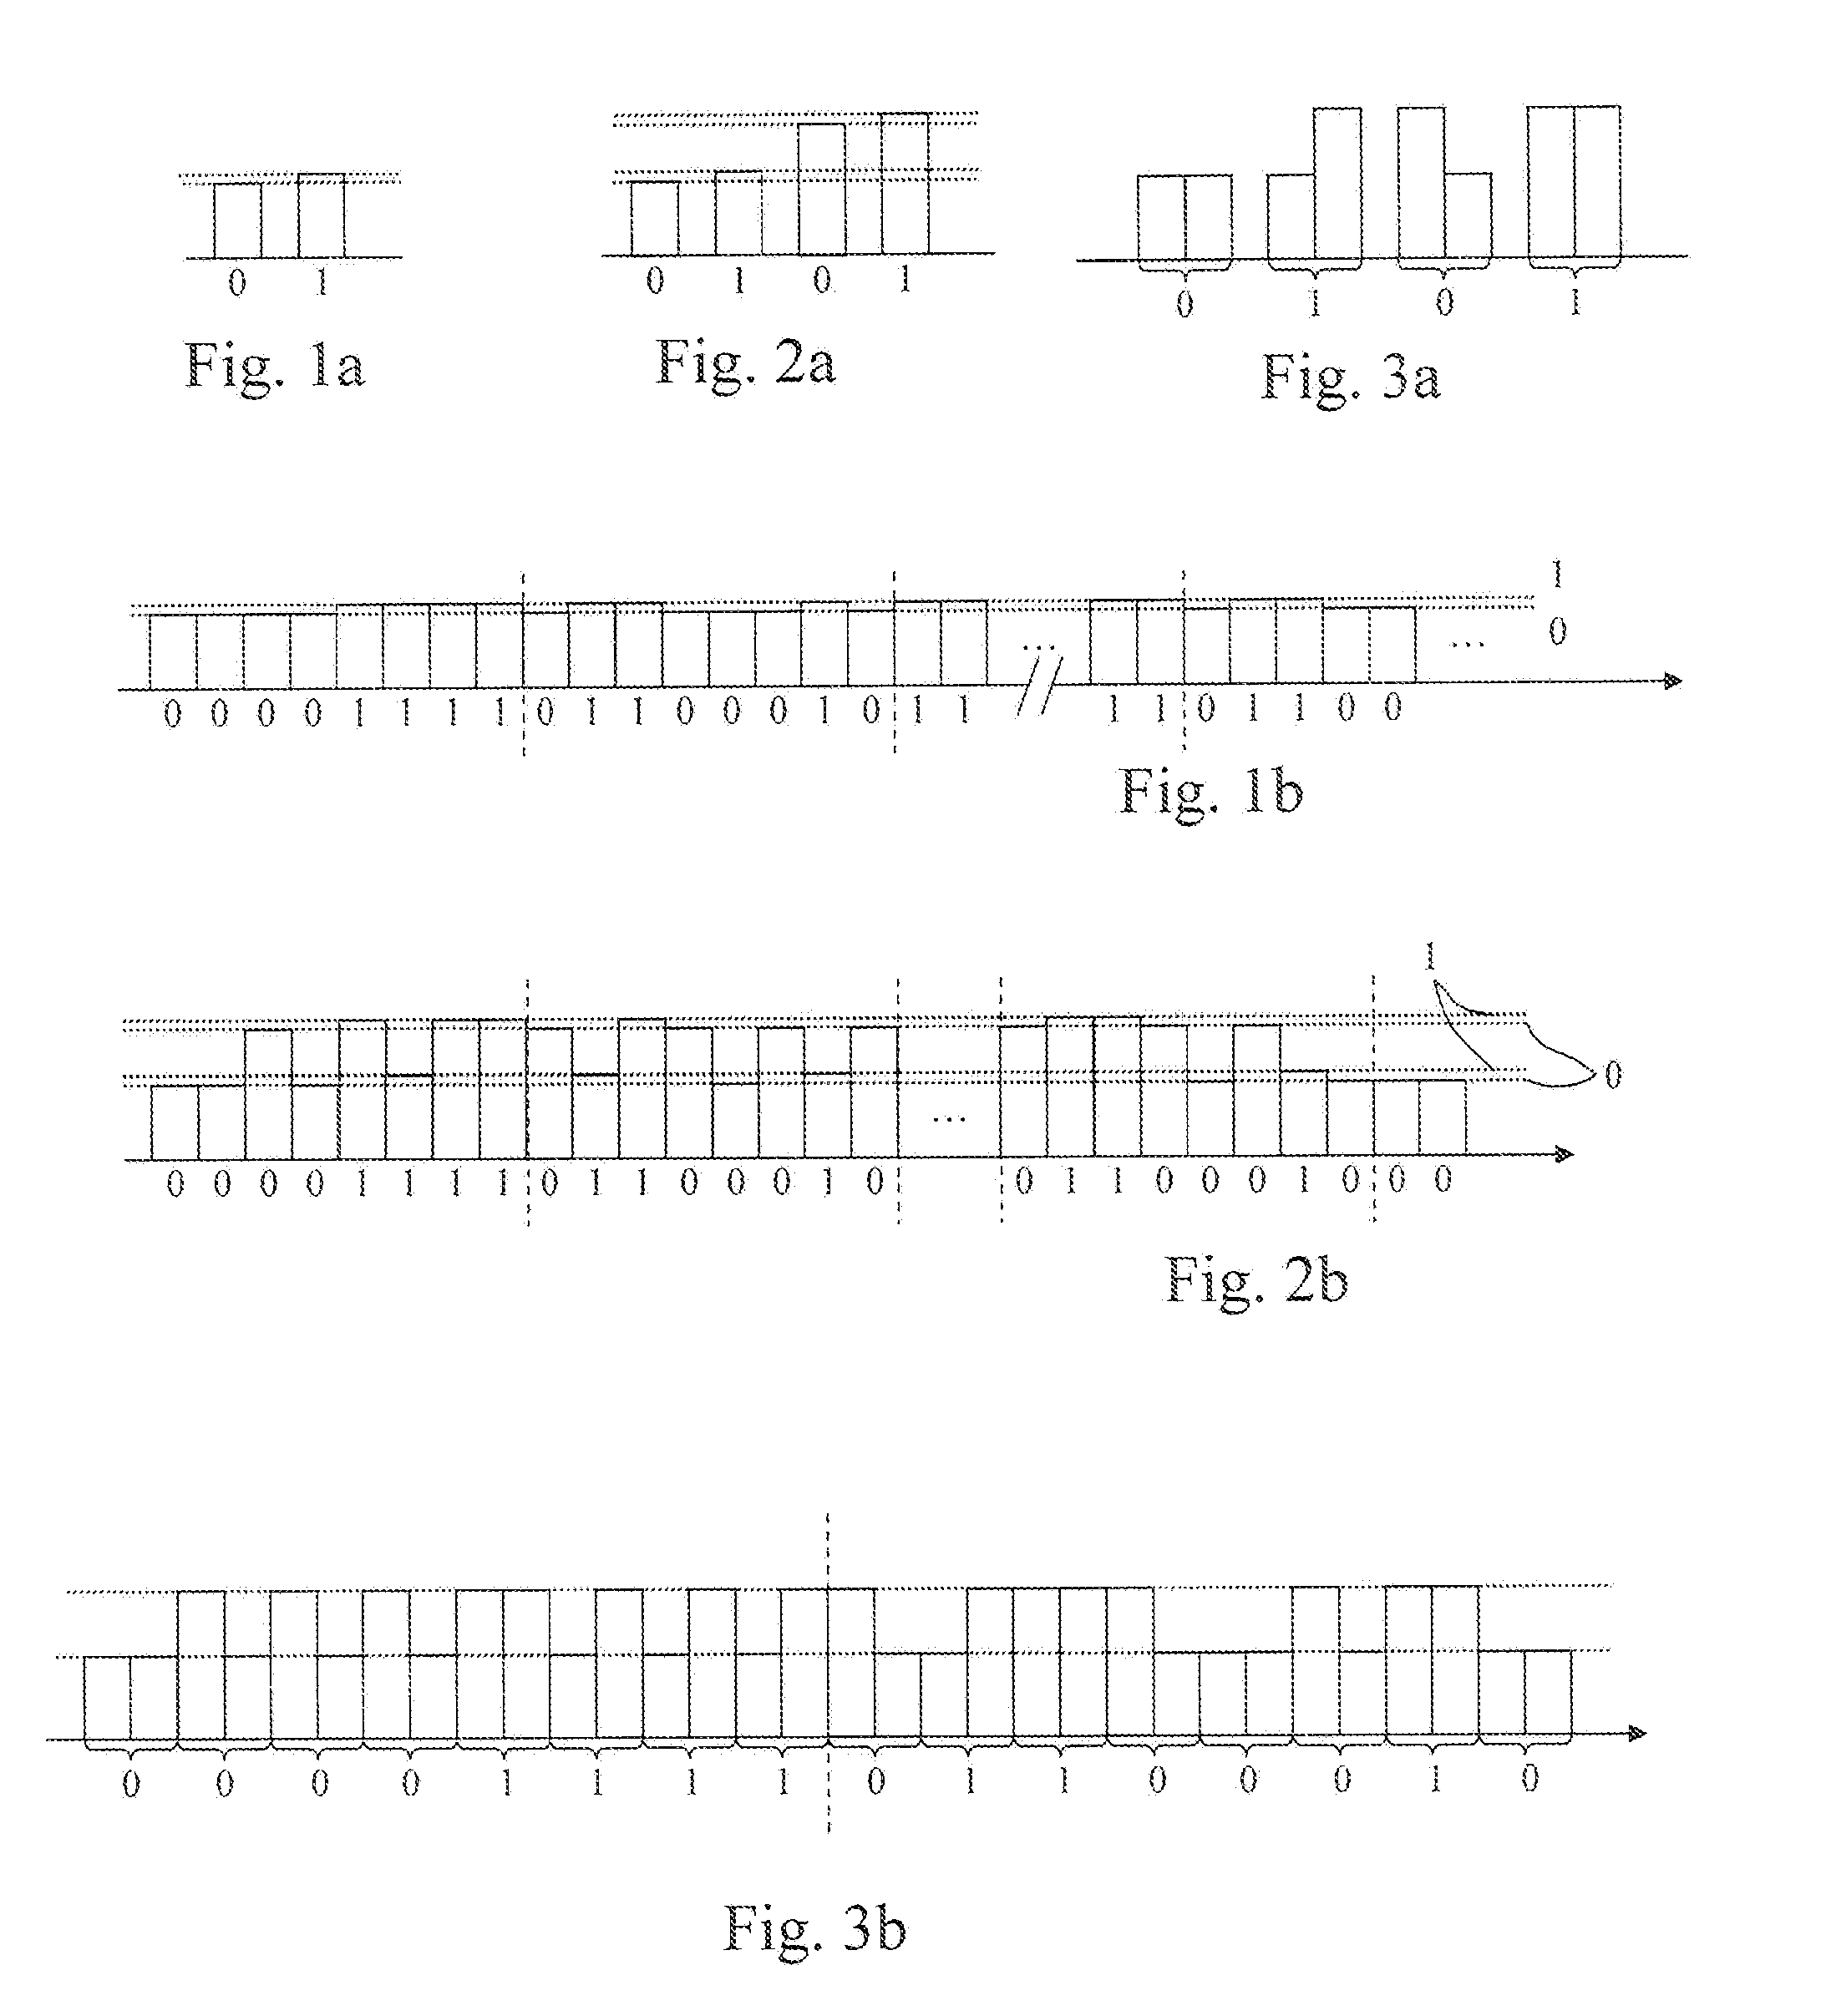 Method for buidling and transmitting a watermarked content, and method for detecting a watermark of said content